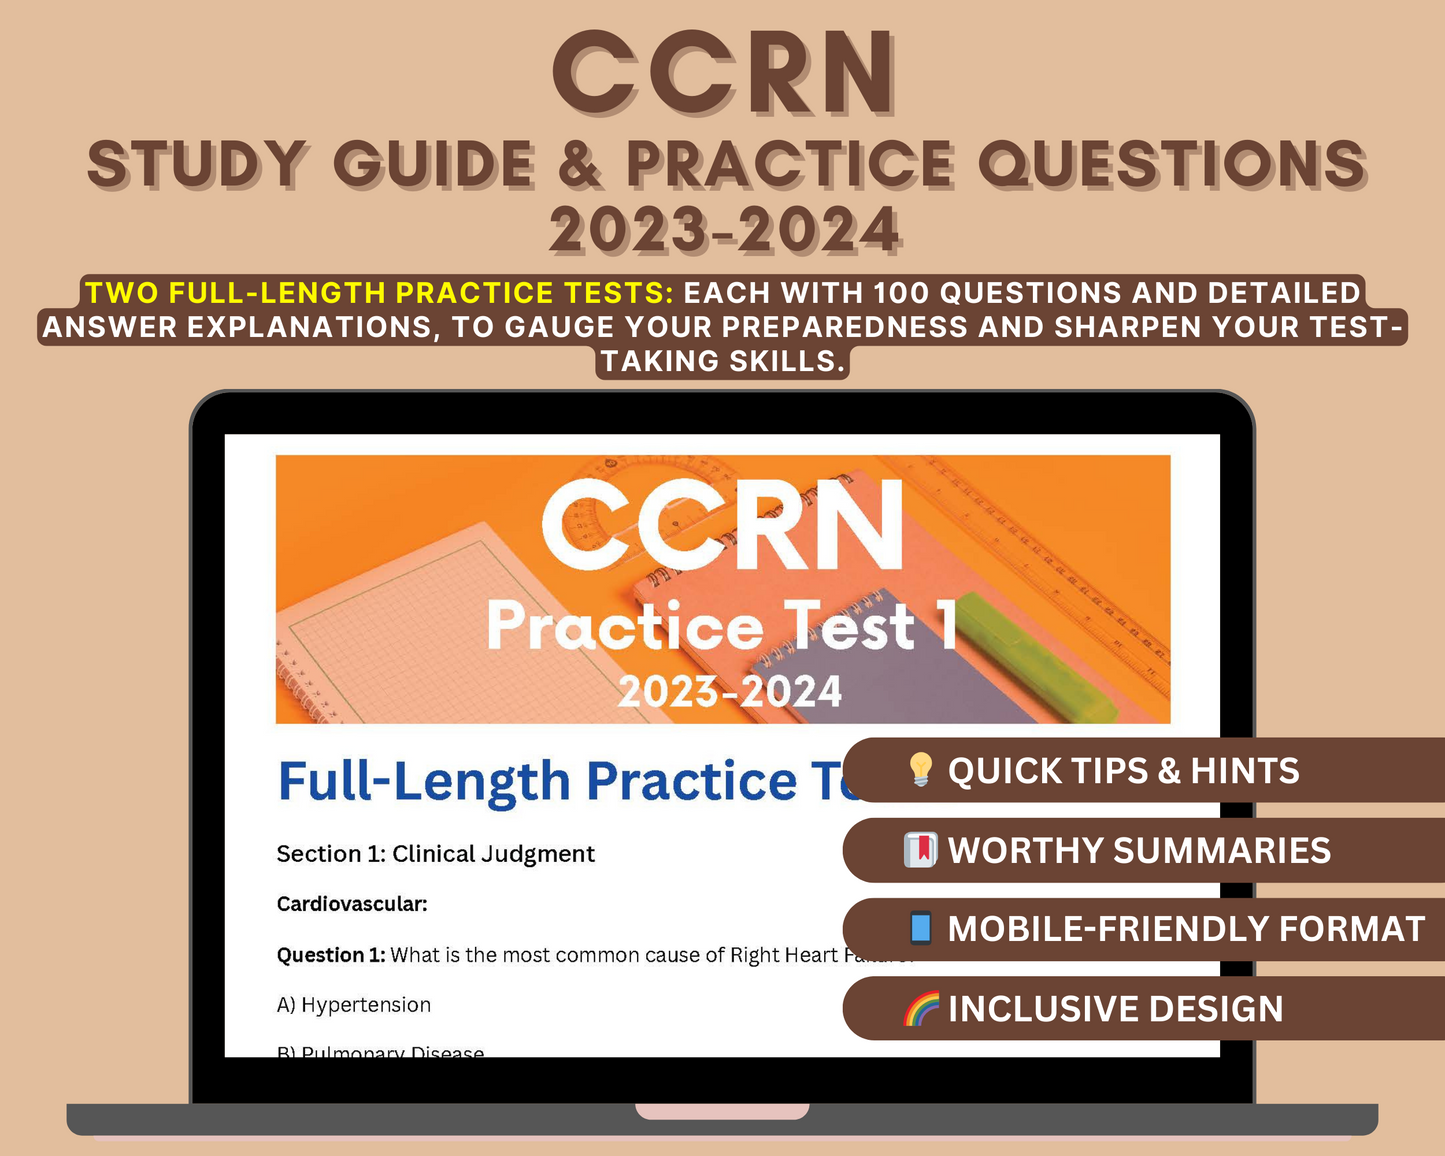 Adult CCRN Study Guide 2023-24: Critical Care Nursing Practice Questions, Detailed Answers, Tips & Strategies - ICU Nurse Certification Exam